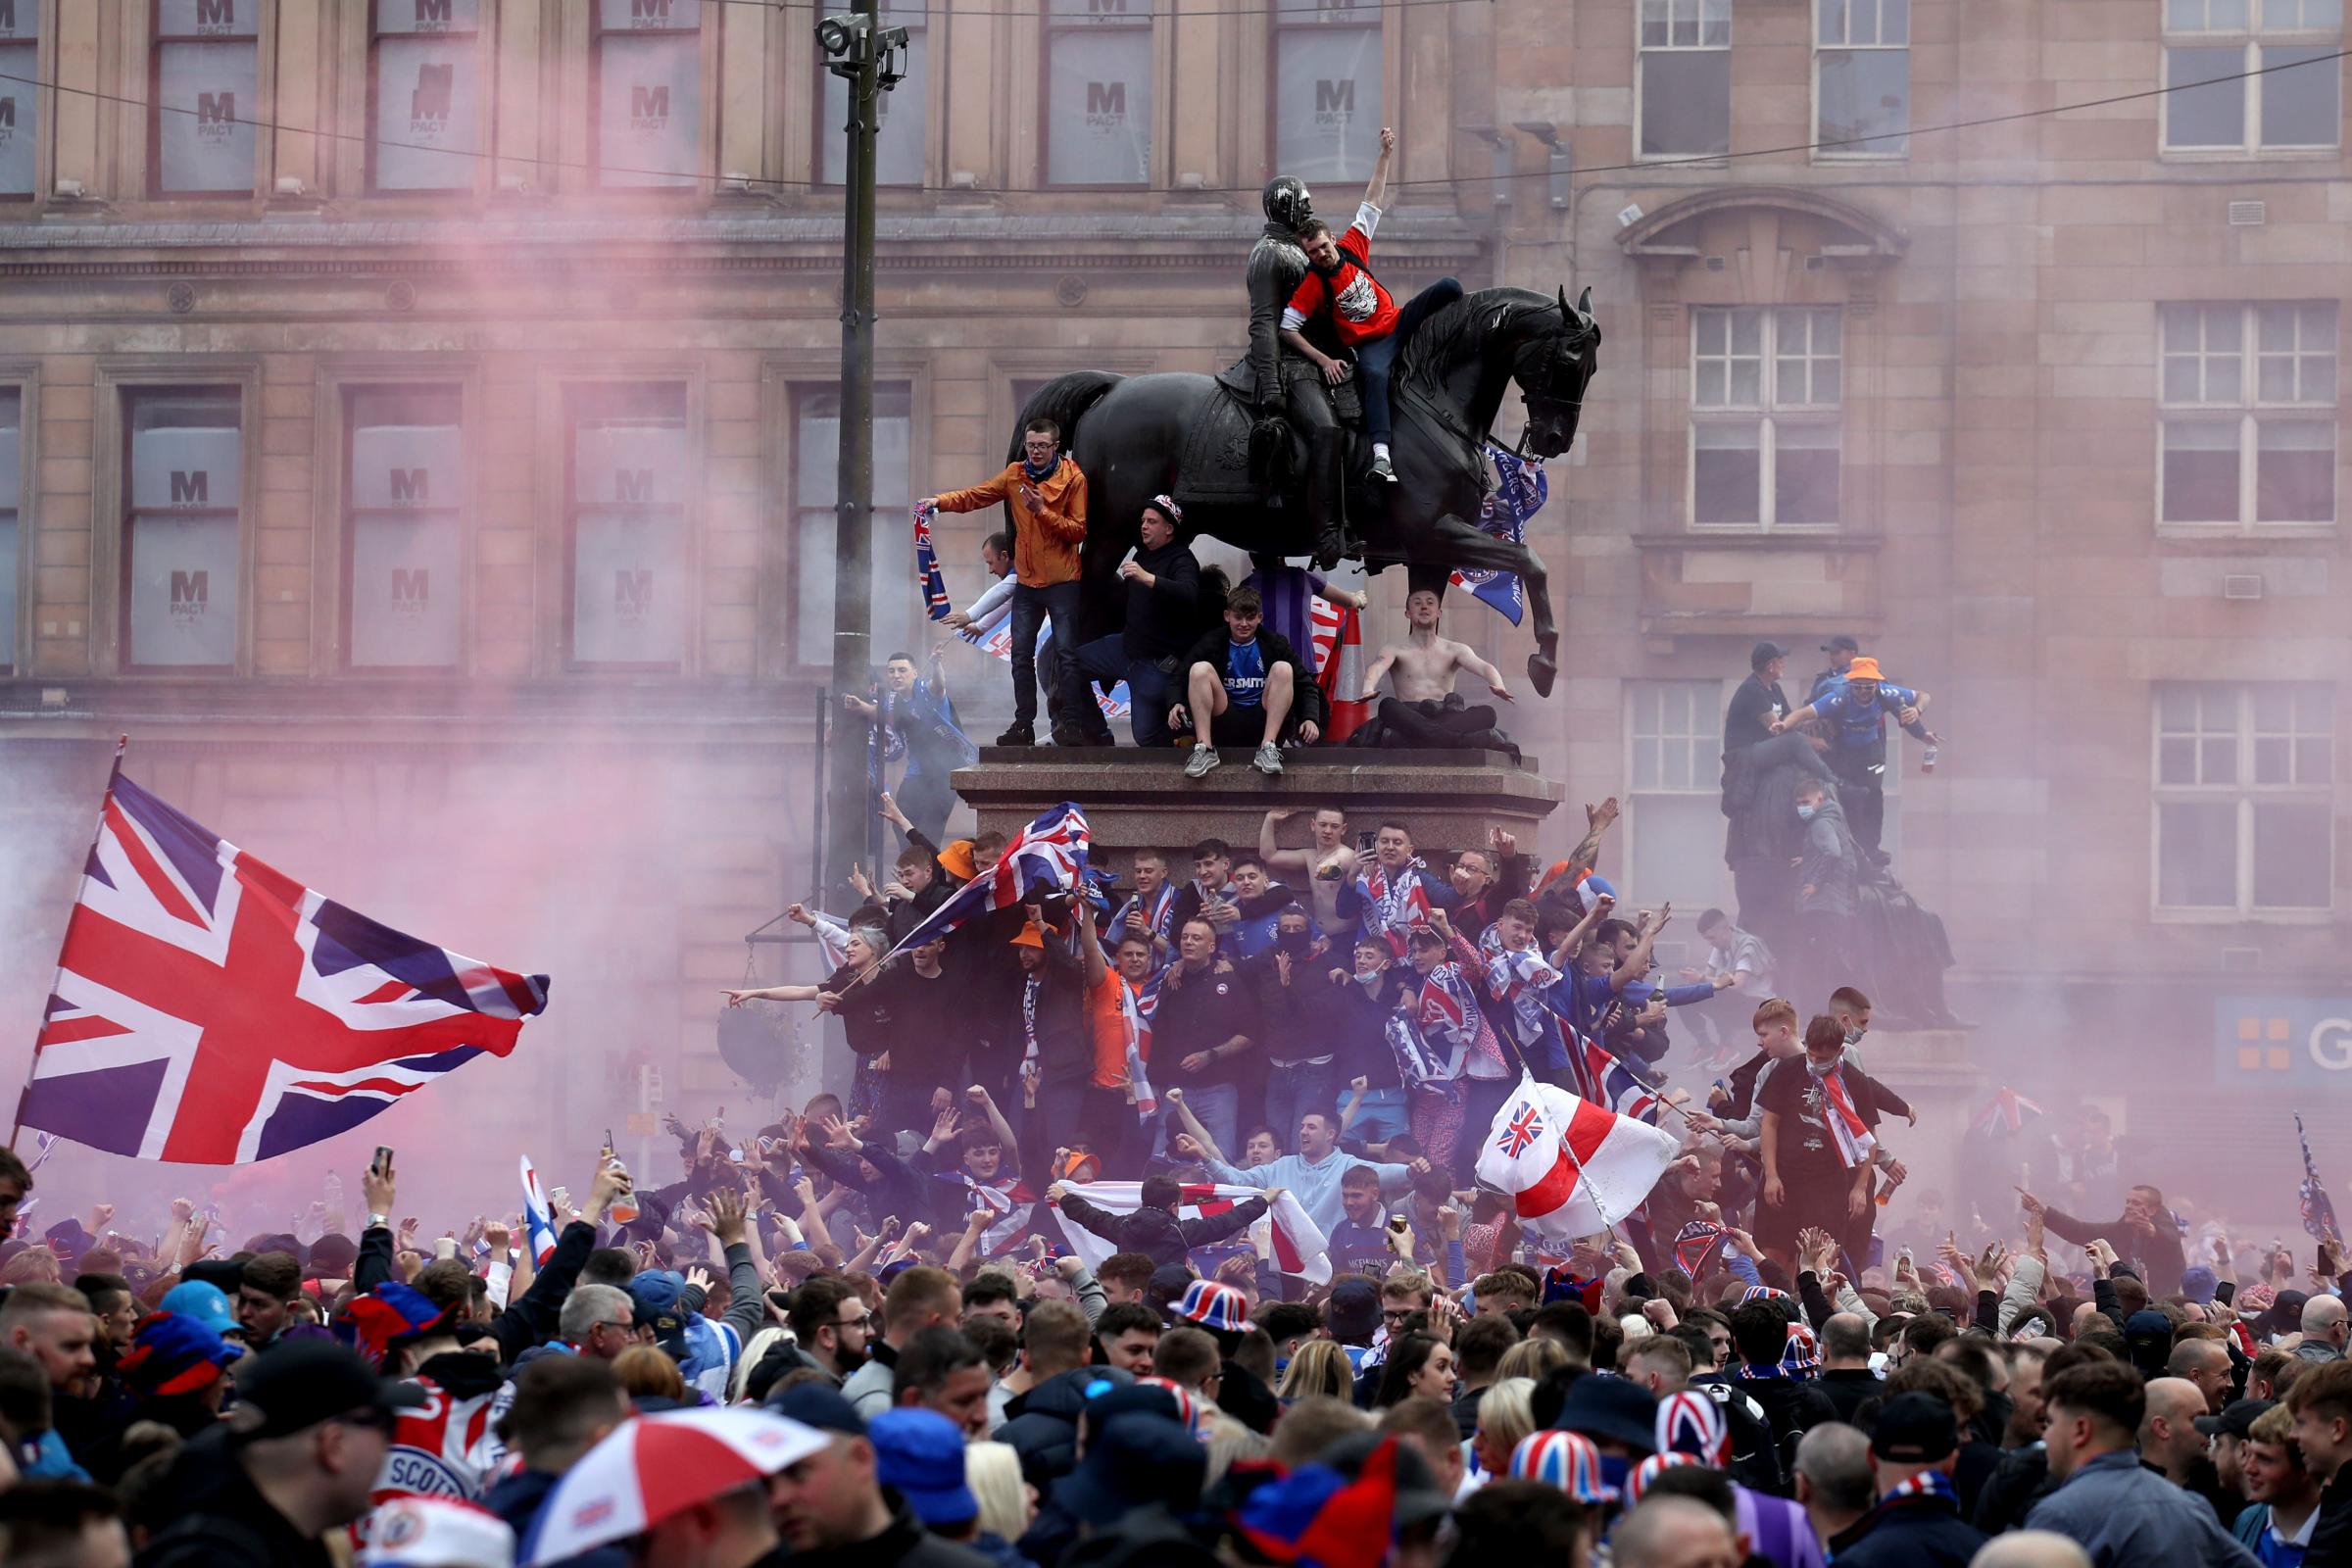 George Square: Man arrested in connection to Rangers fans' title day celebrations